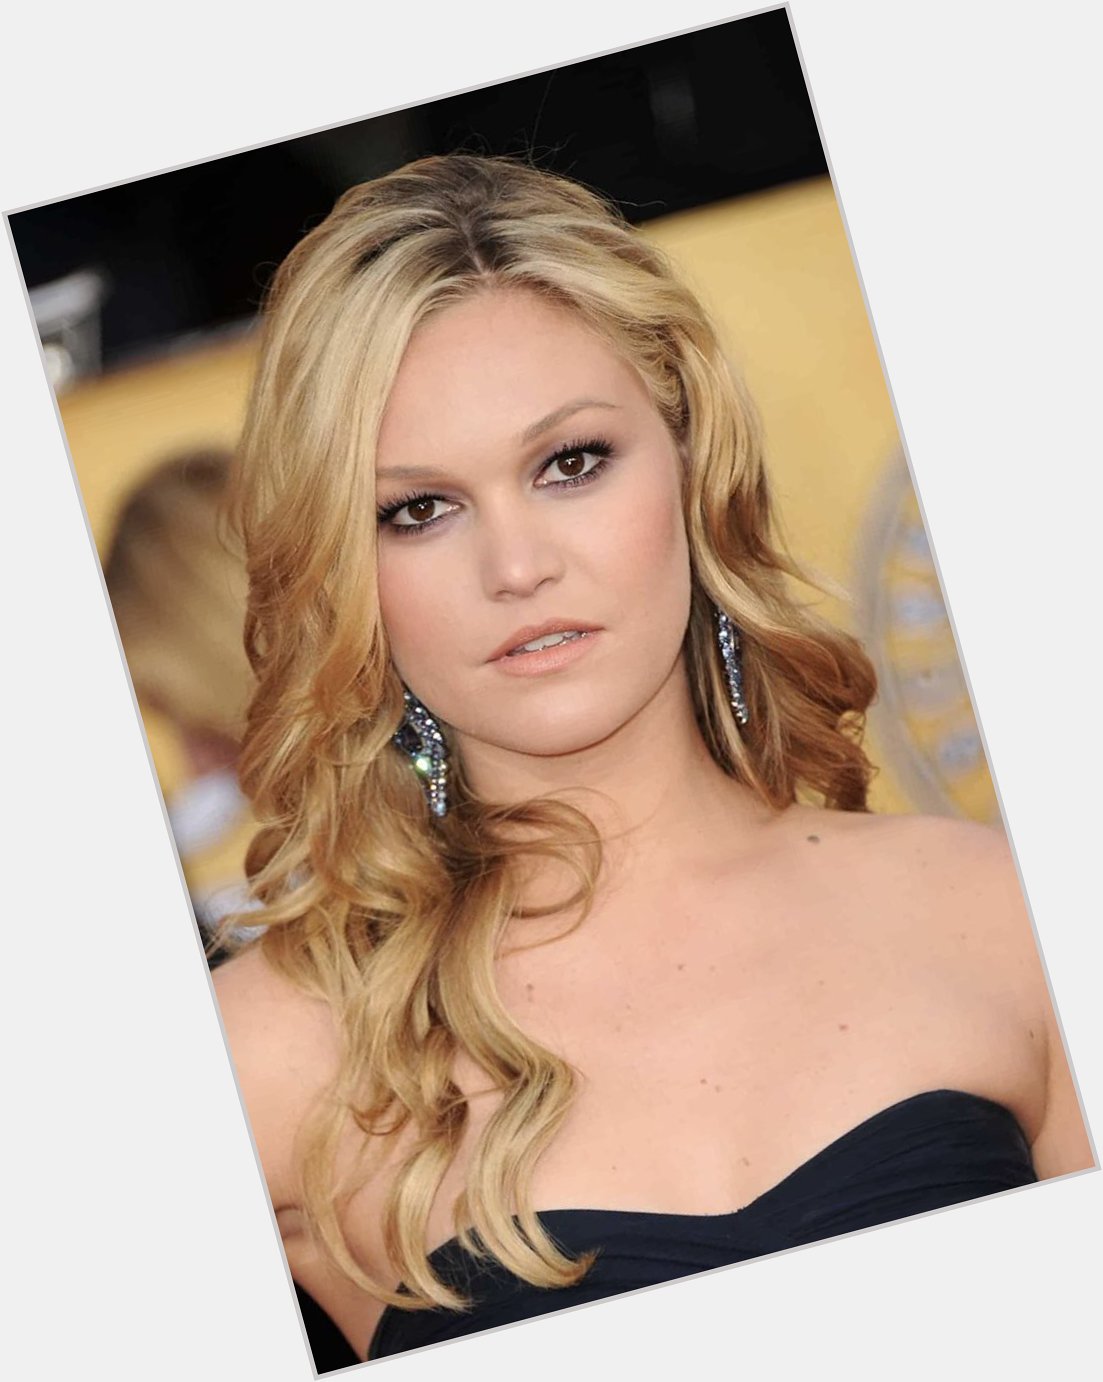 Seriously though, I love Julia Stiles and I hope she has a really happy 40th birthday!     